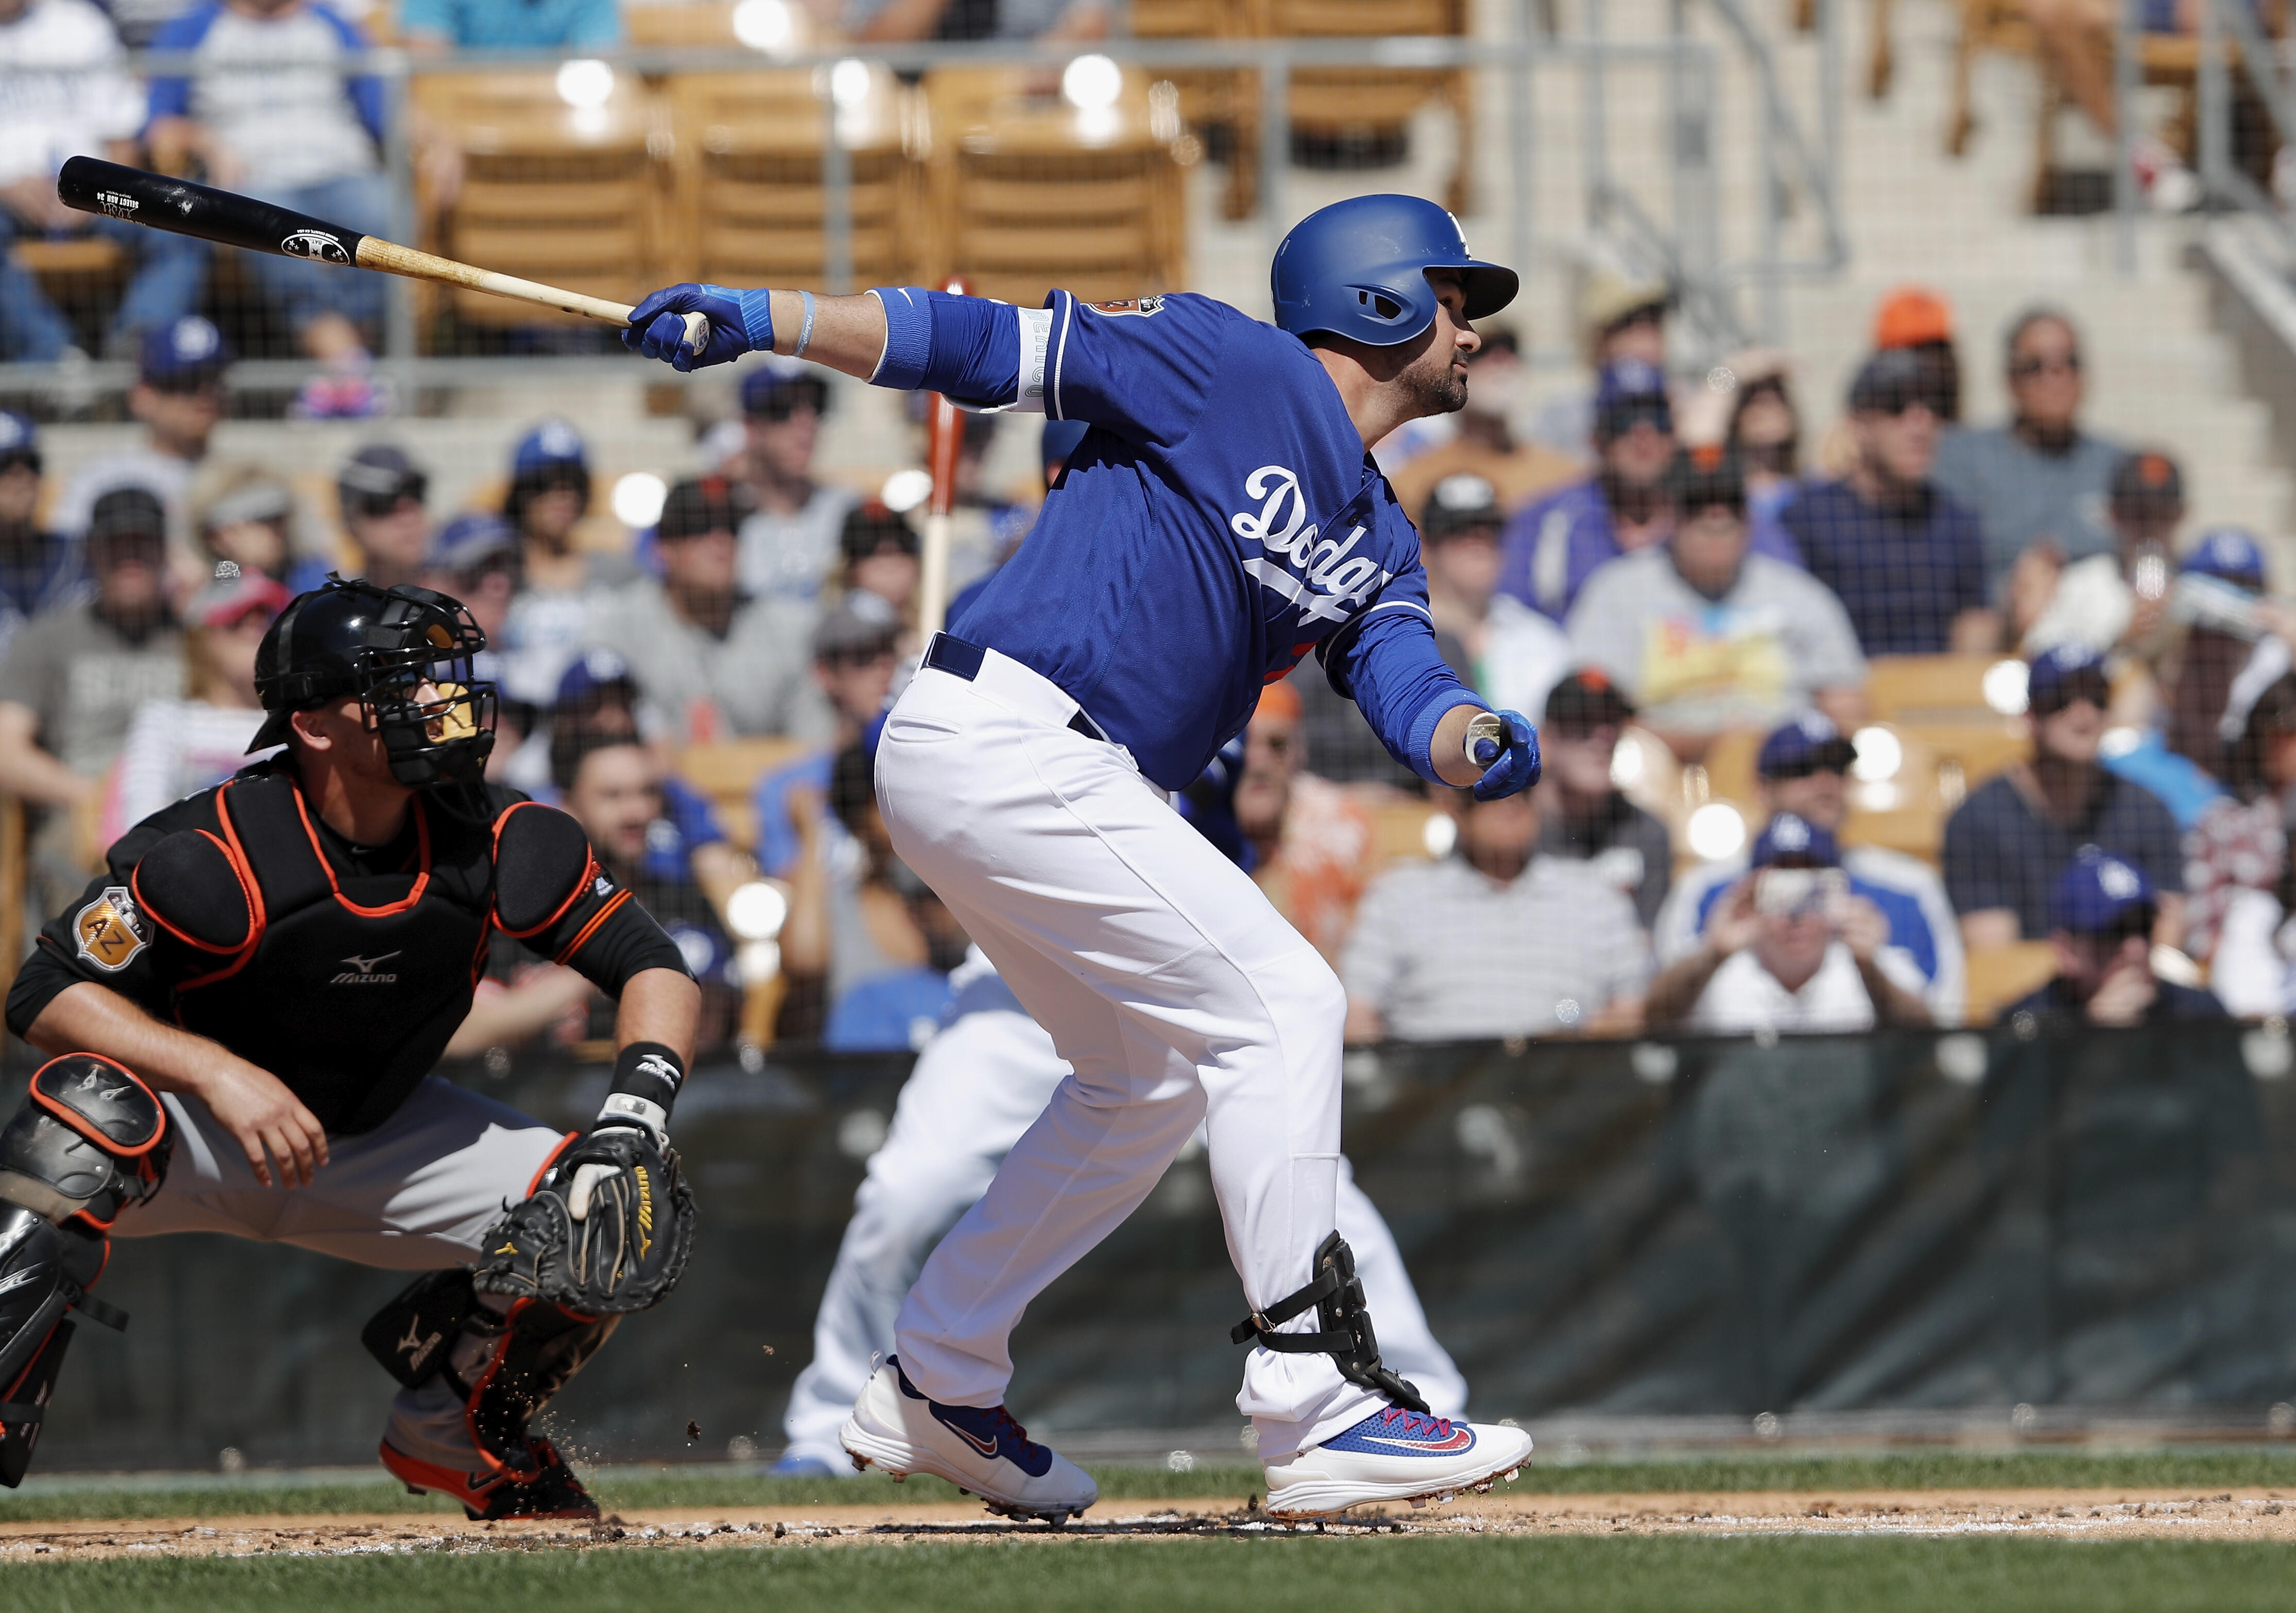 GLENDALE, AZ - MARCH 07:  Adrian Gonzalez #23 of the Los Angeles Dodgers singles in the first inning against the San Francisco Giants during the spring training game at Camelback Ranch on March 7, 2017 in Glendale, Arizona.  (Photo by Tim Warner/Getty Ima